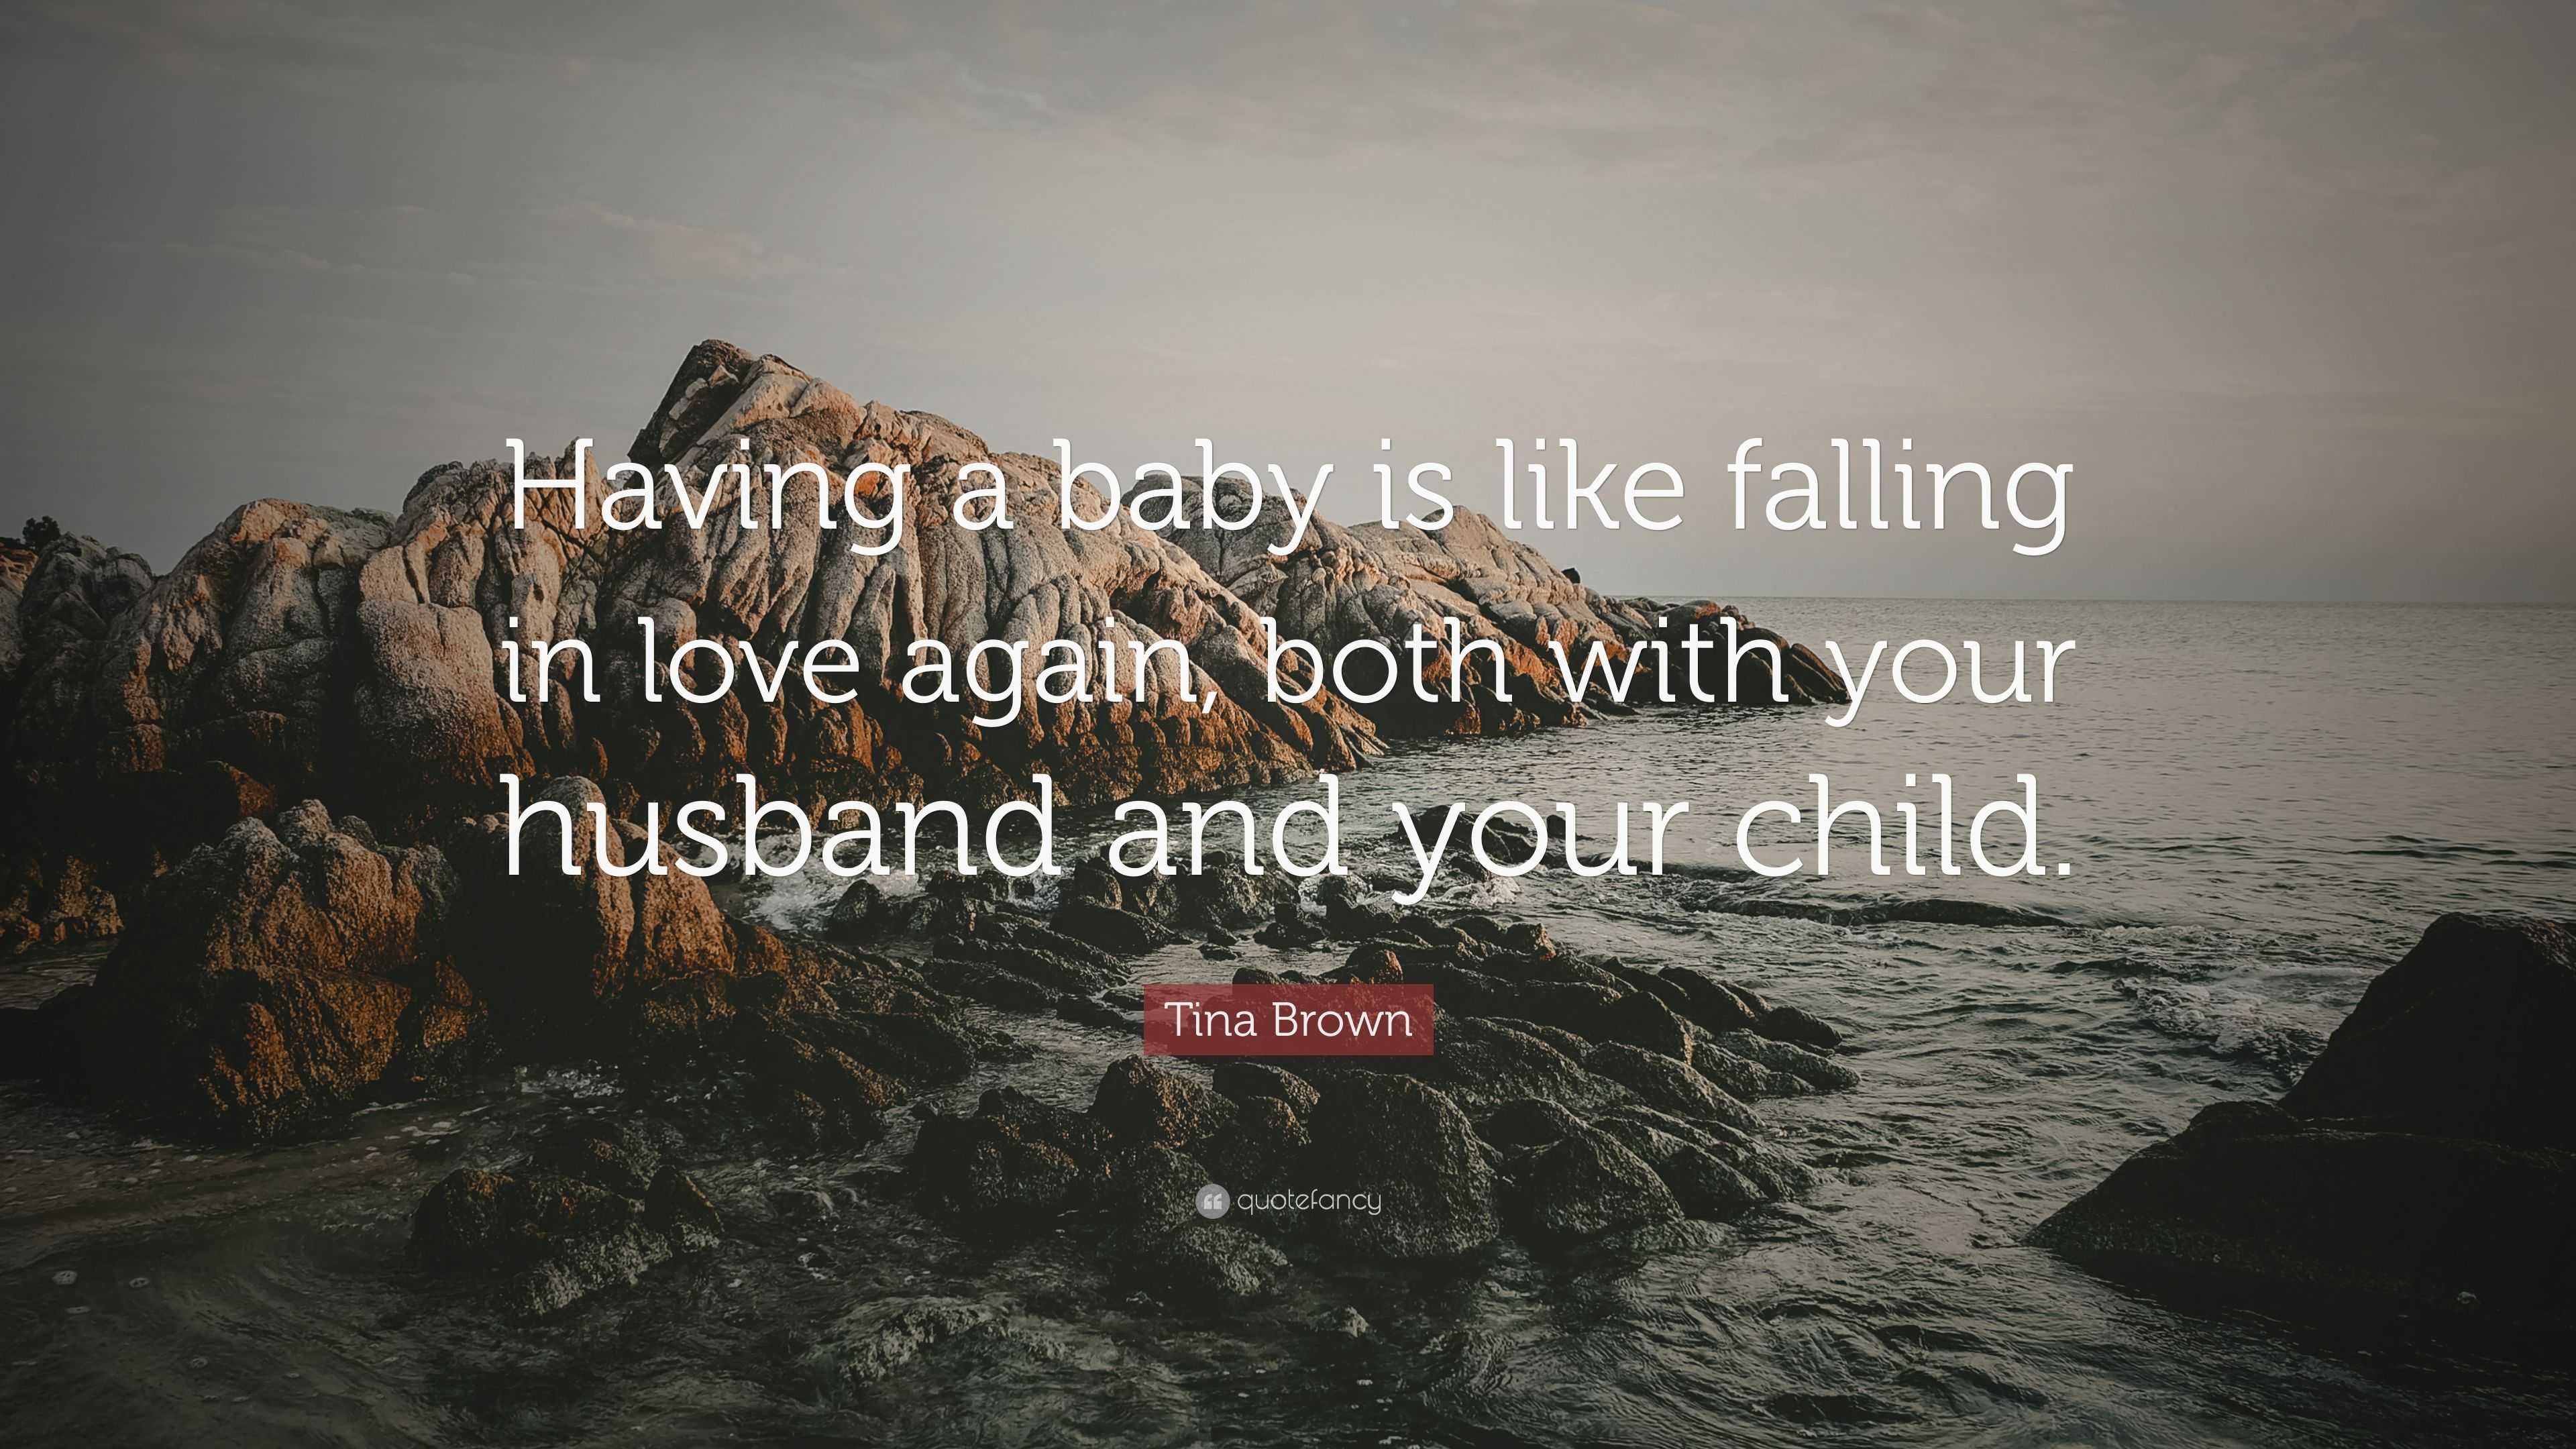 Tina Brown Quote: “Having a baby is like falling in love again, both ...